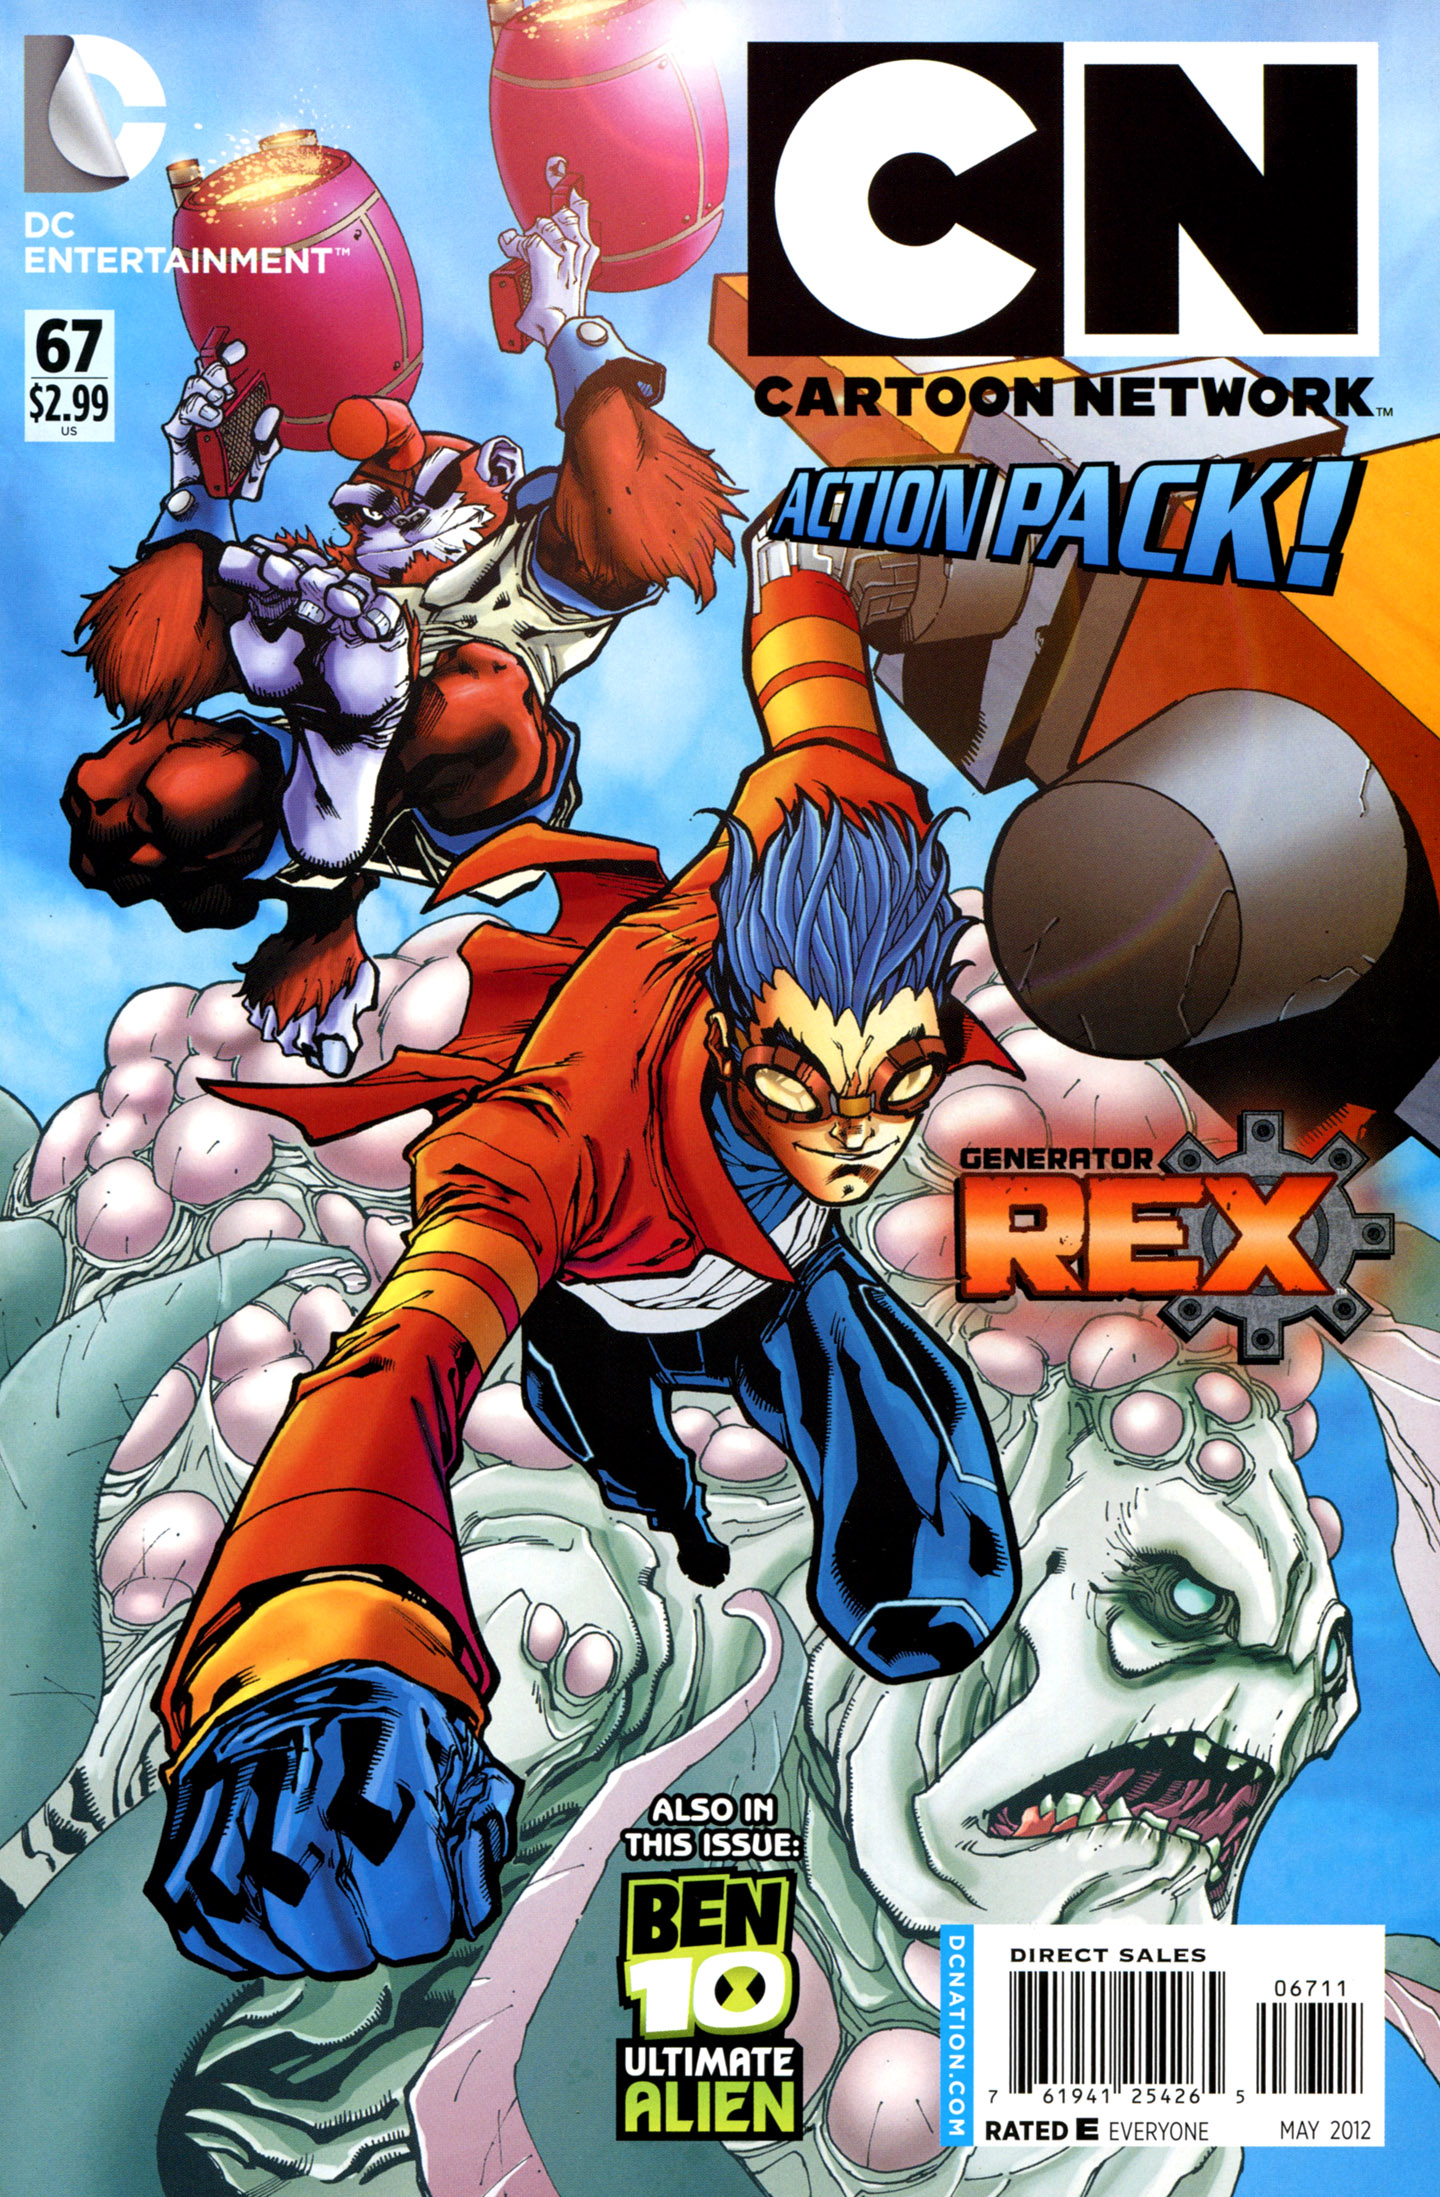 Argee Transformers Comic Porn - Cartoon Network Action Pack Issue 67 | Read Cartoon Network Action Pack  Issue 67 comic online in high quality. Read Full Comic online for free -  Read comics online in high quality .